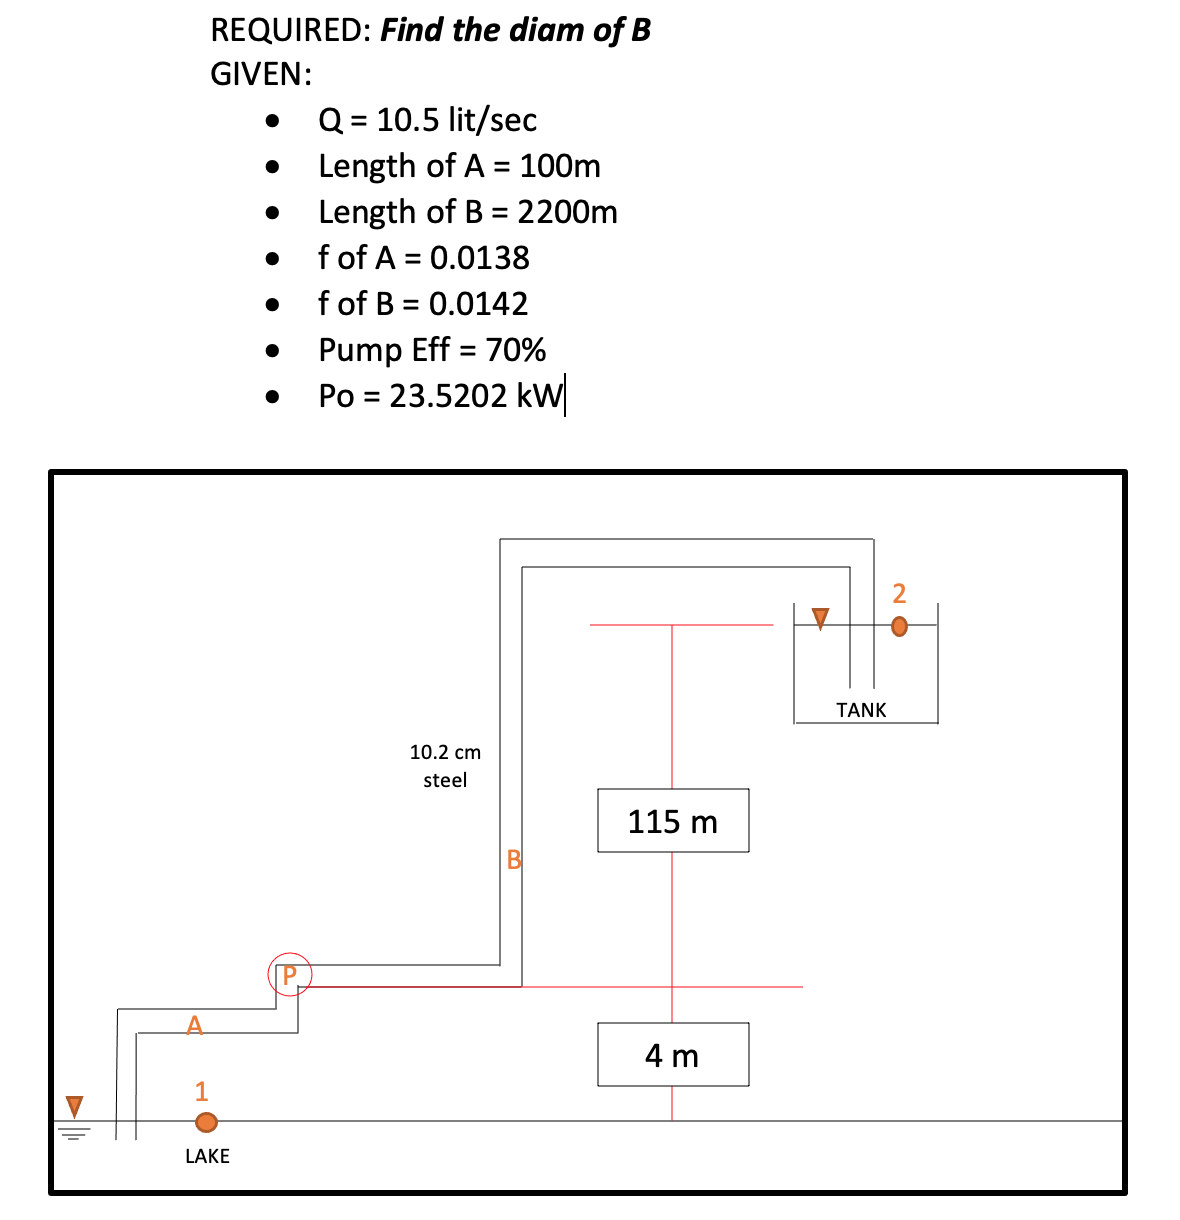 ➤I
REQUIRED: Find the diam of B
GIVEN:
Q = 10.5 lit/sec
●
Length of A = 100m
Length of B = 2200m
f of A = 0.0138
f of B = 0.0142
Pump Eff = 70%
Po = 23.5202 kW
10.2 cm
steel
LAKE
115 m
4 m
TANK
ΟΝ